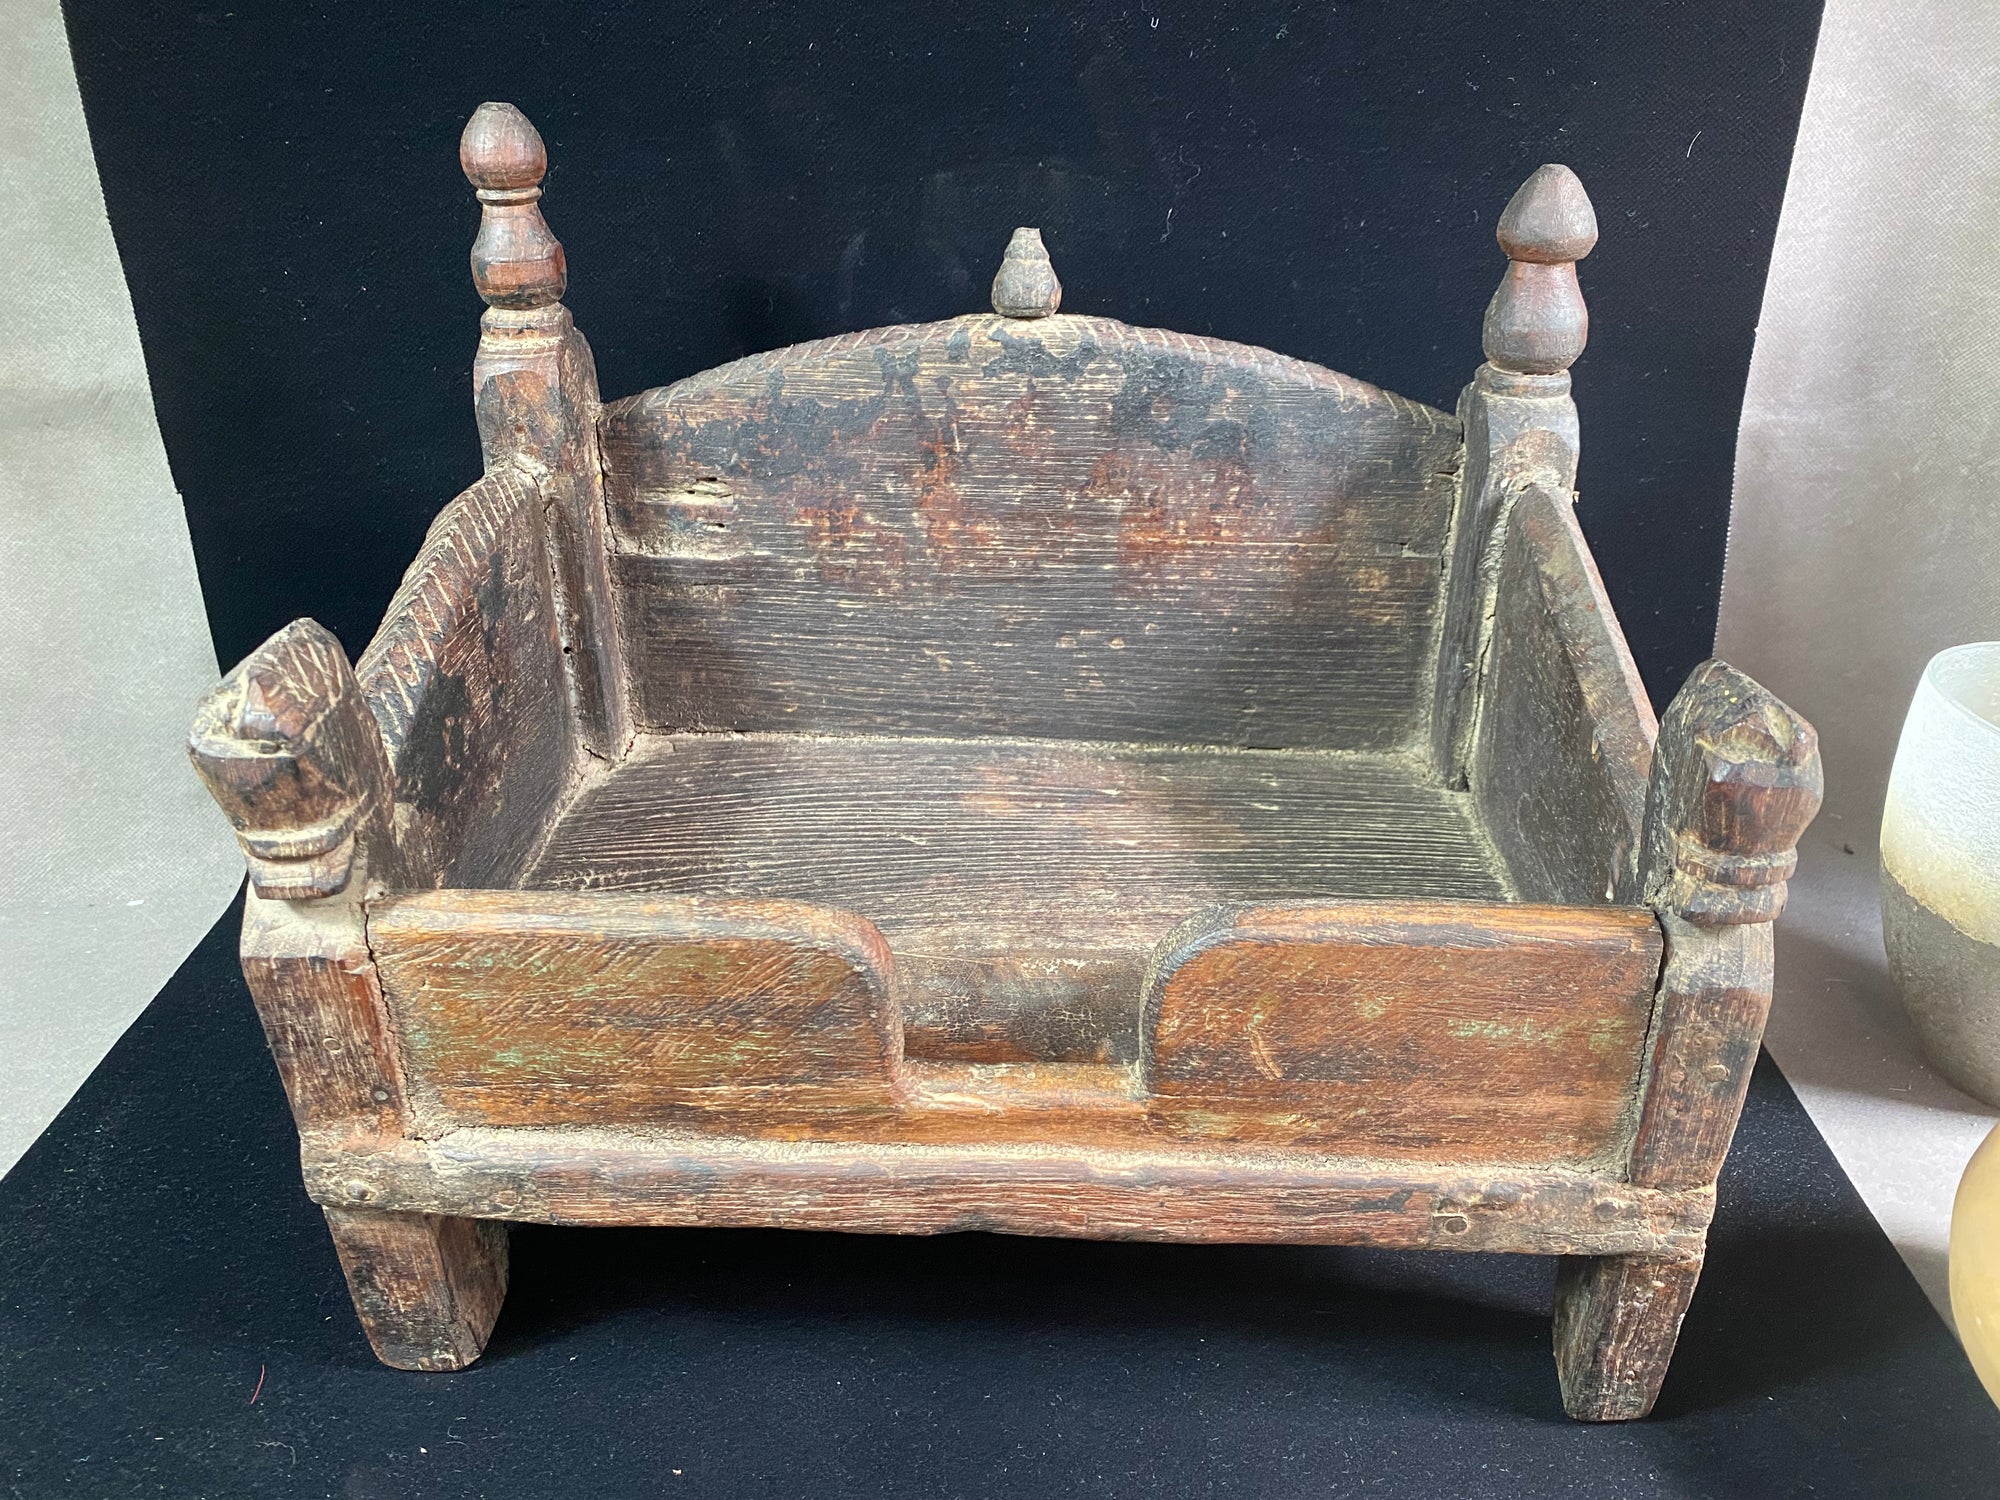 A classic vintage deity seat for the placing of your favourite deity statue. Hand carved teak wood with two horse heads decorating the front. This is an old piece with several small patches and repairs. Early 20th century. Measurements: height 27 cm at back, width 32 cm, depth 22 cm